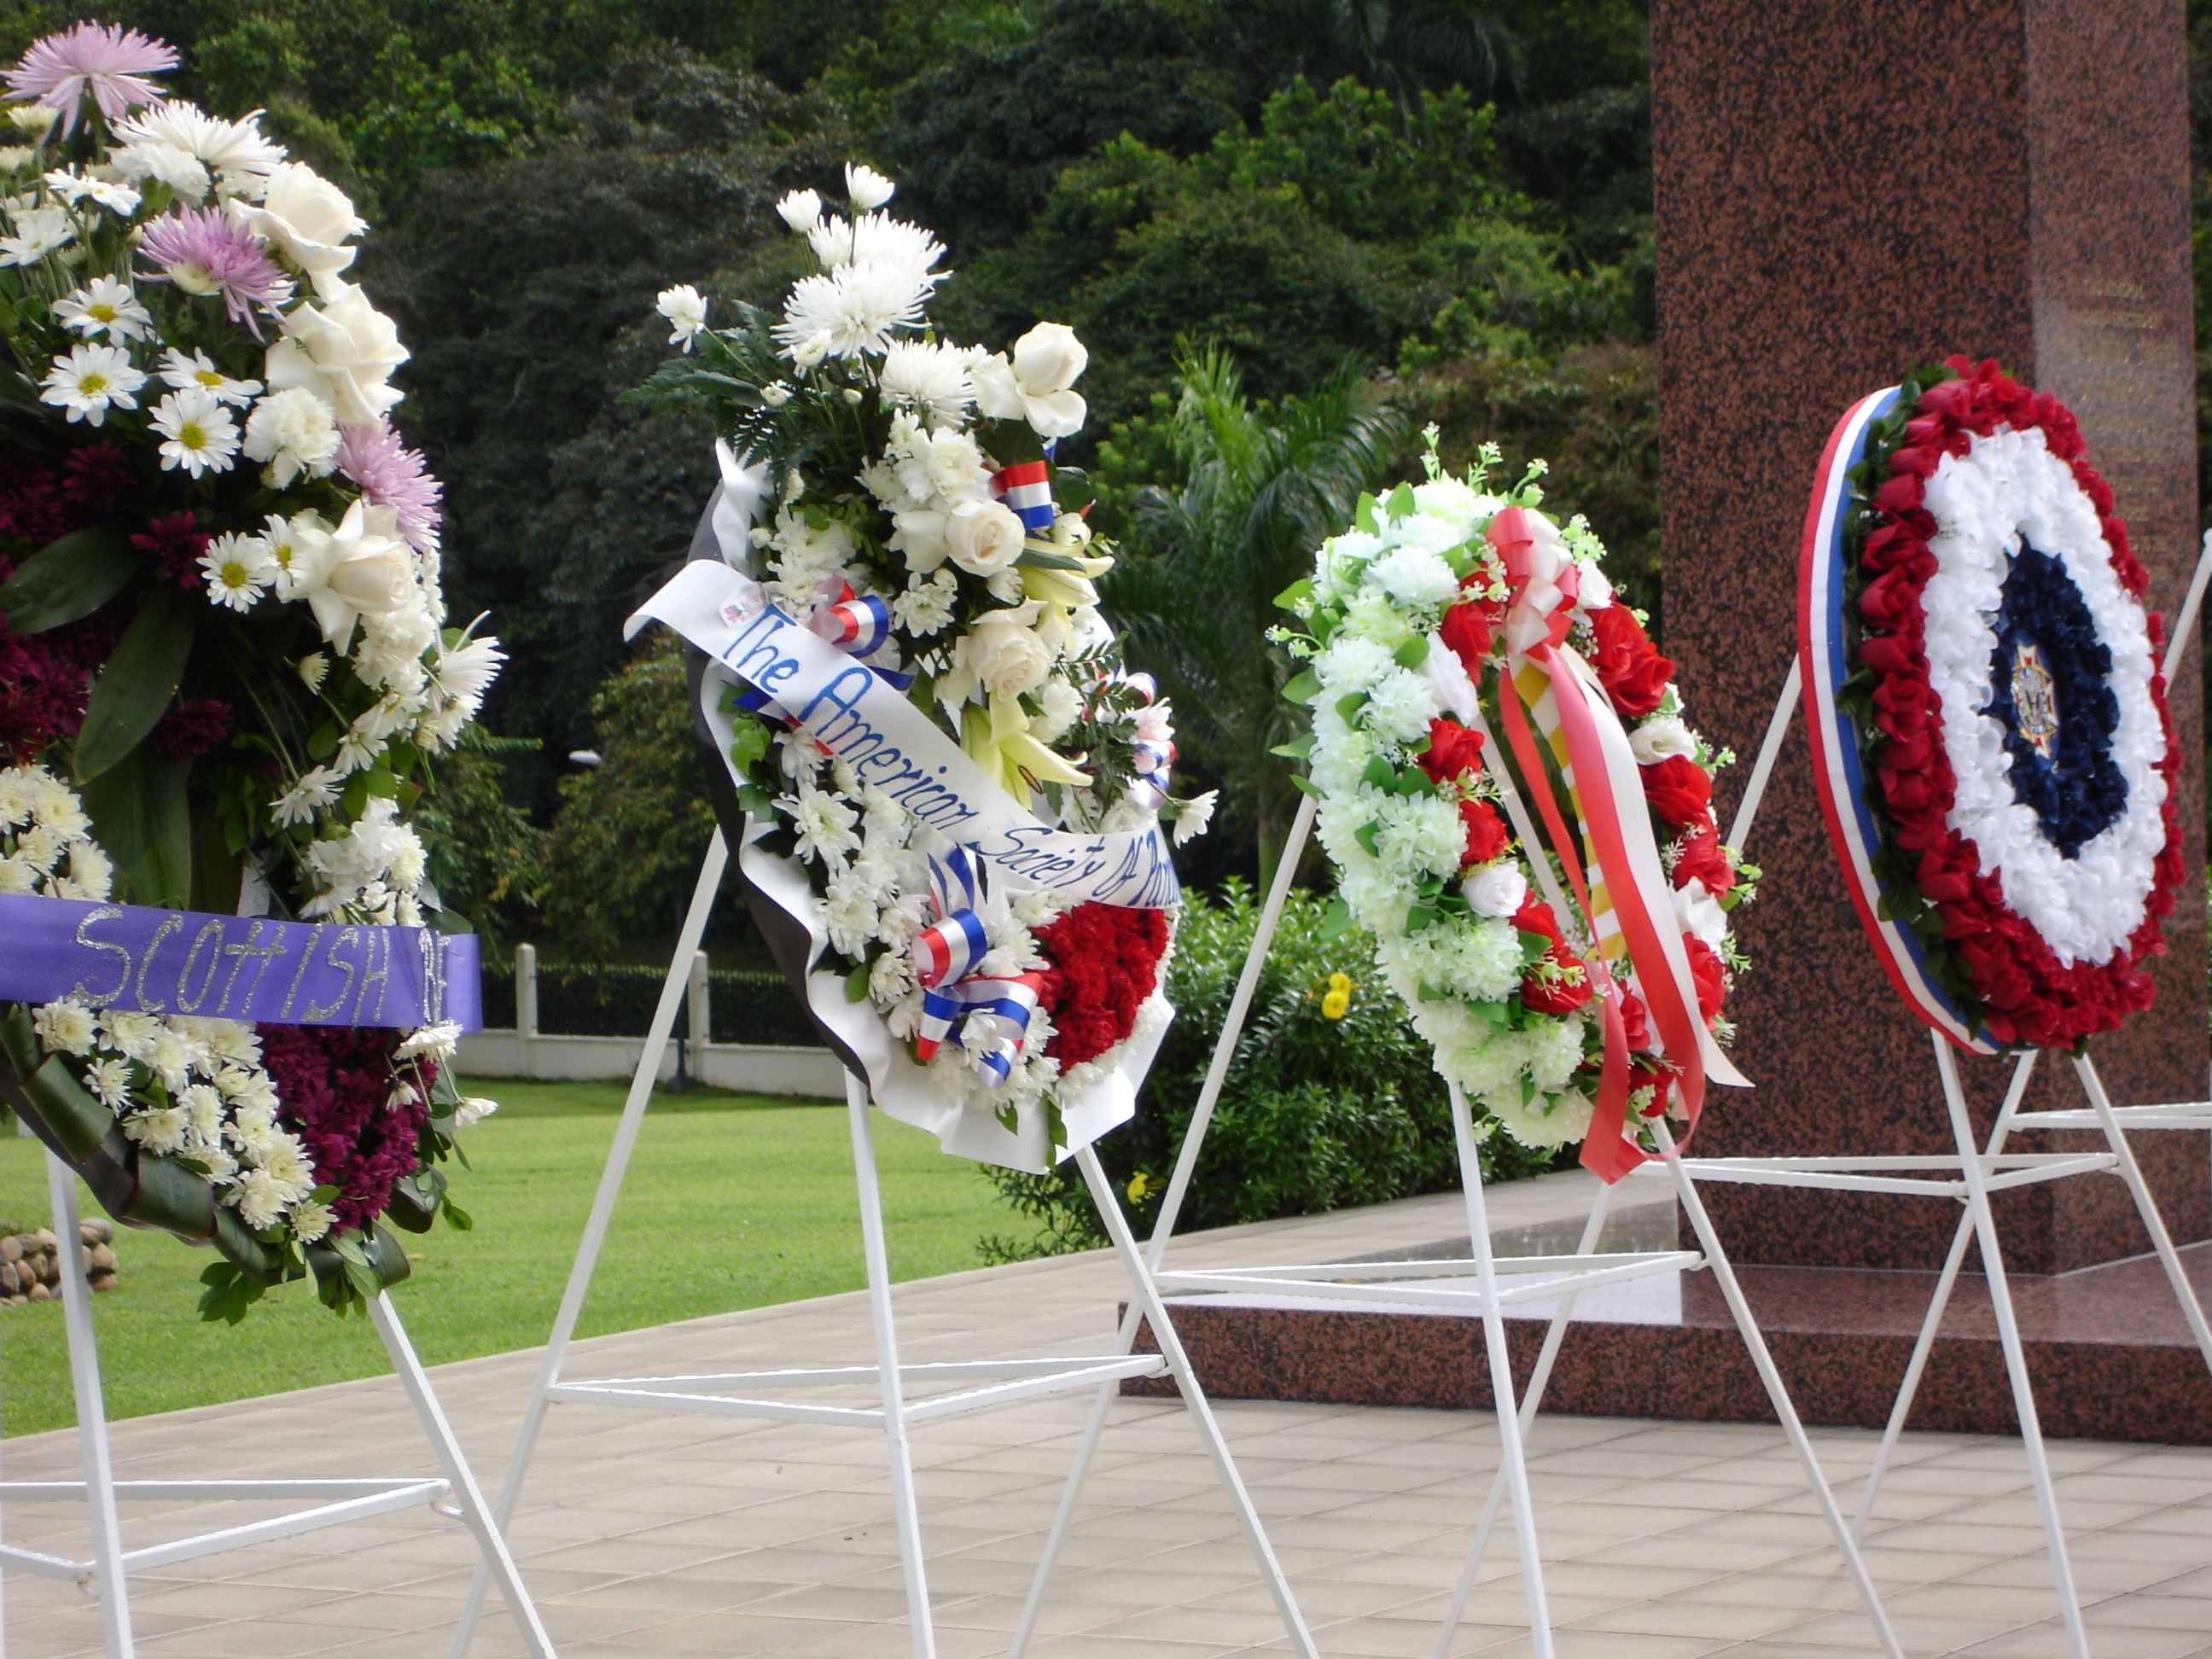 Four large floral wreaths rest on stands after the ceremony.